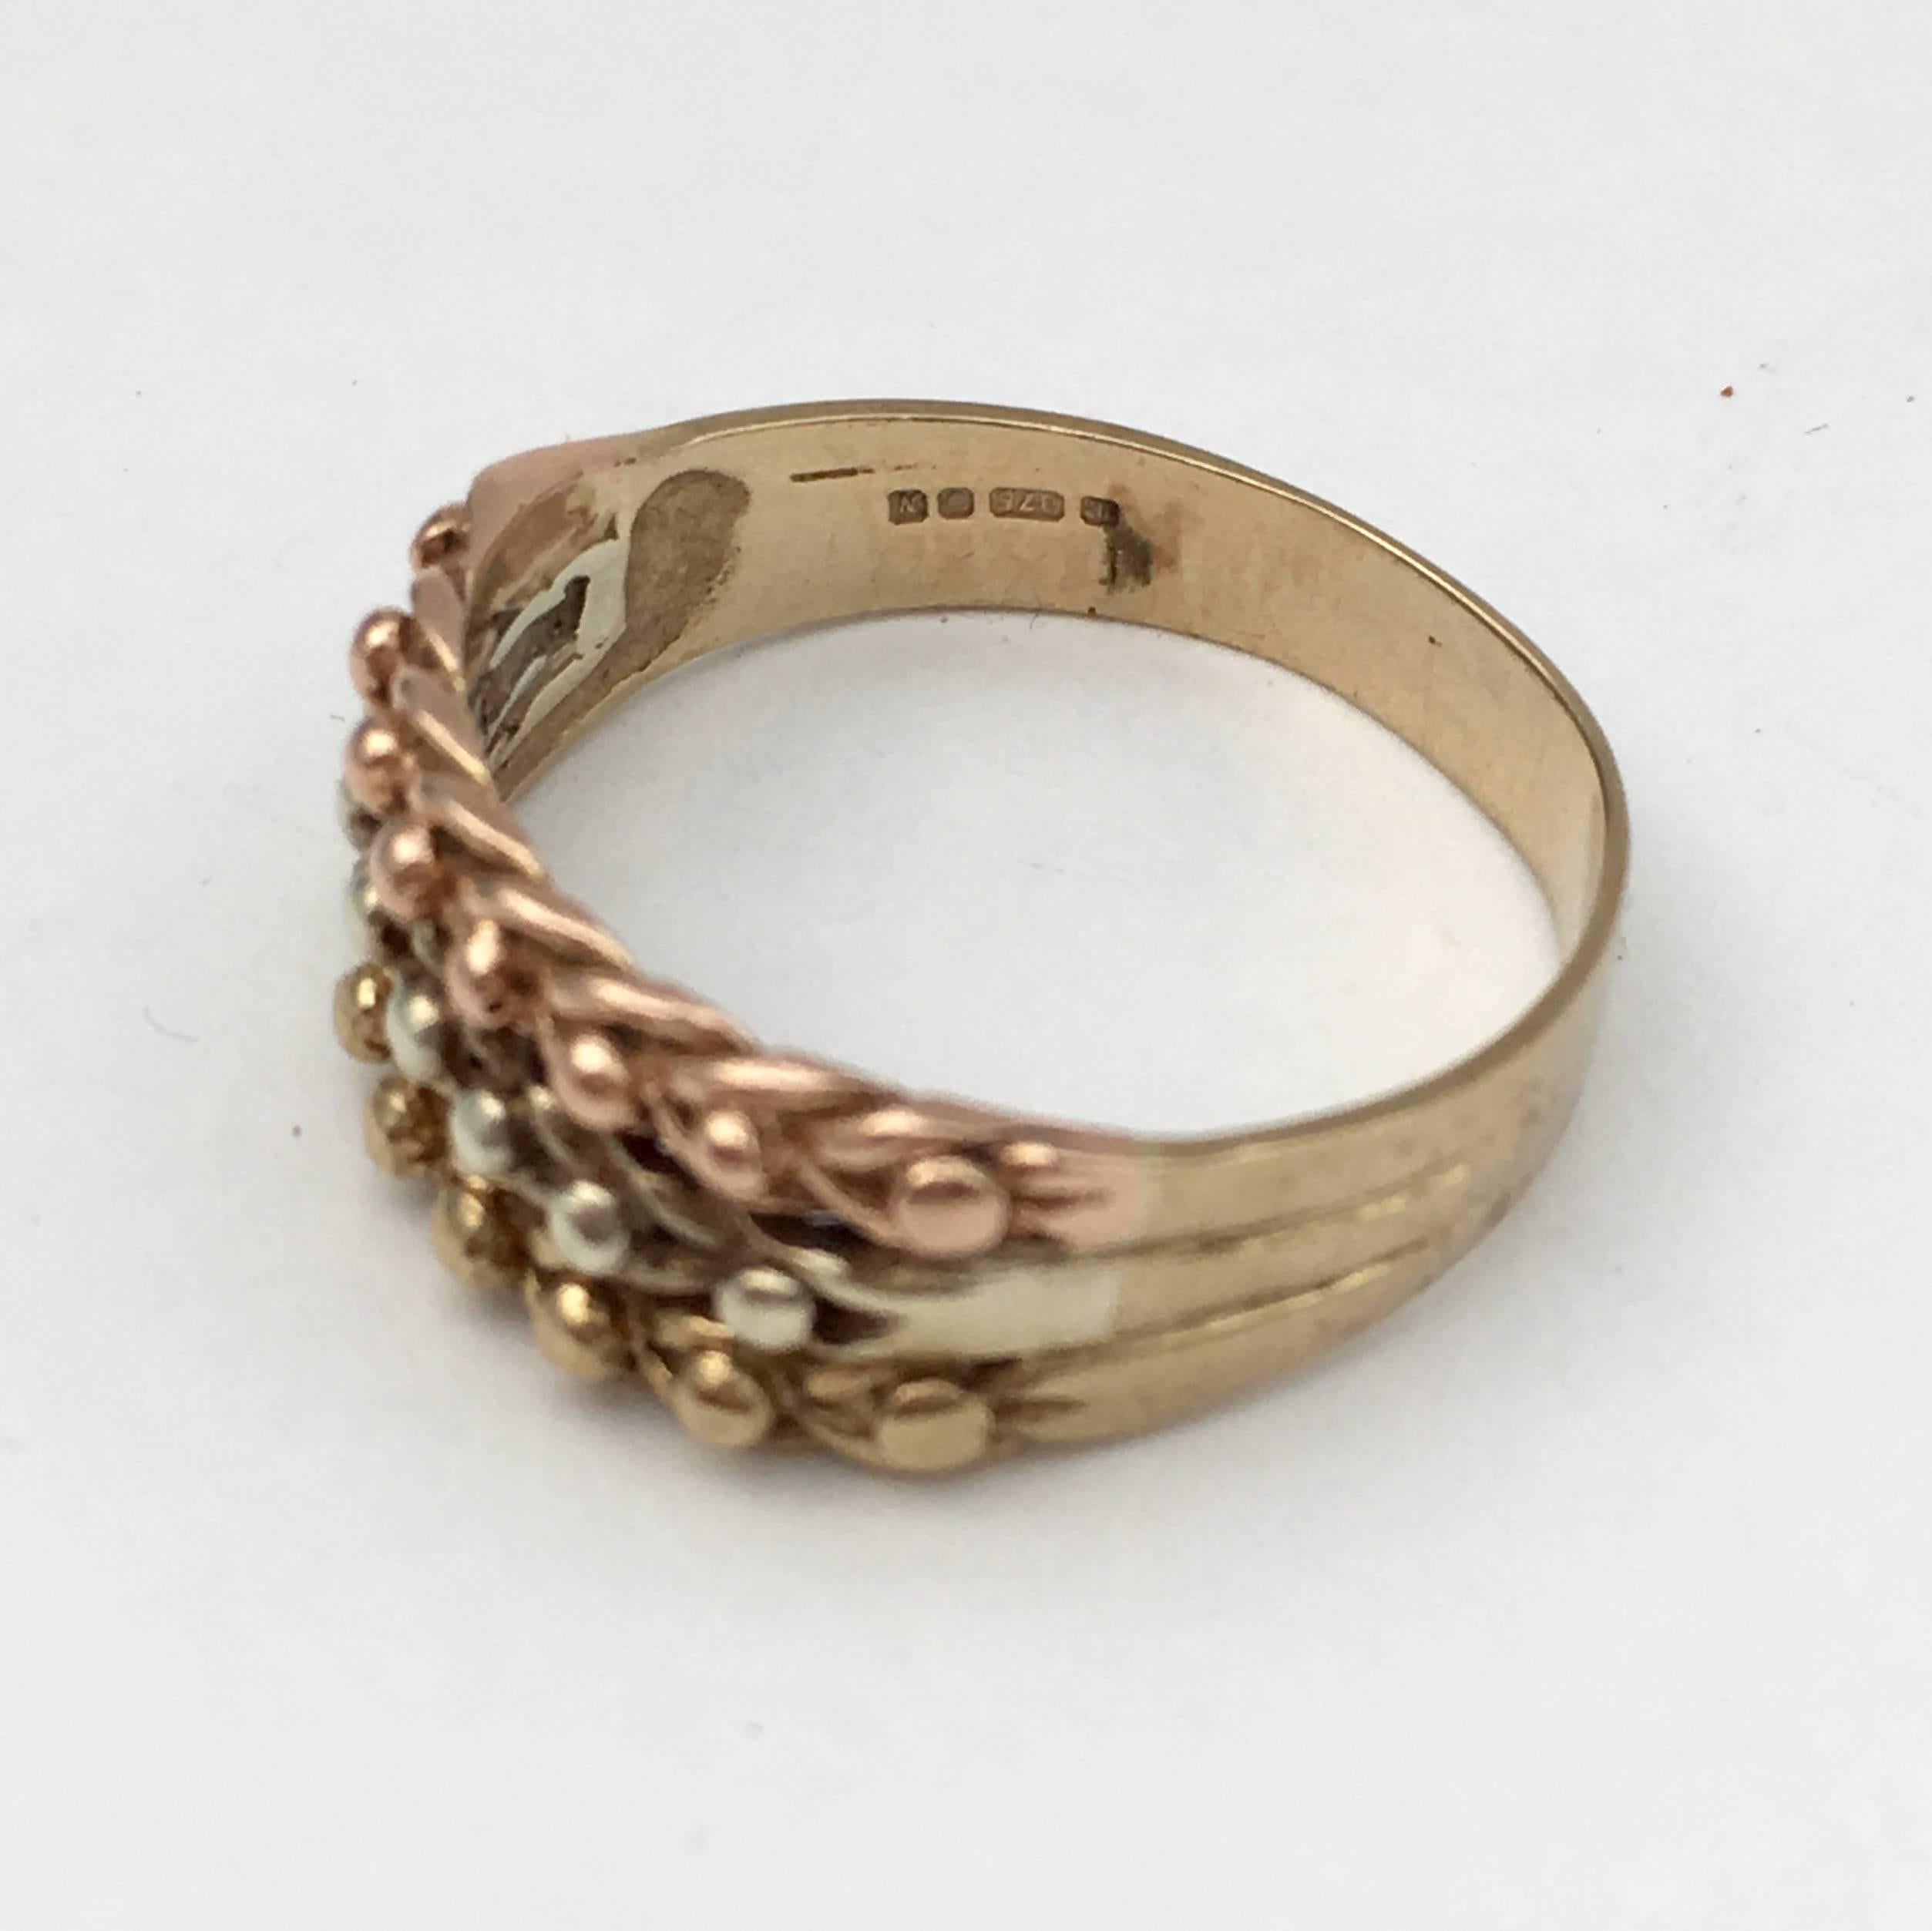 Women's or Men's Vintage Keeper Guard Ring Yellow White Rose Gold Woven Chain Trio Tricolor Band